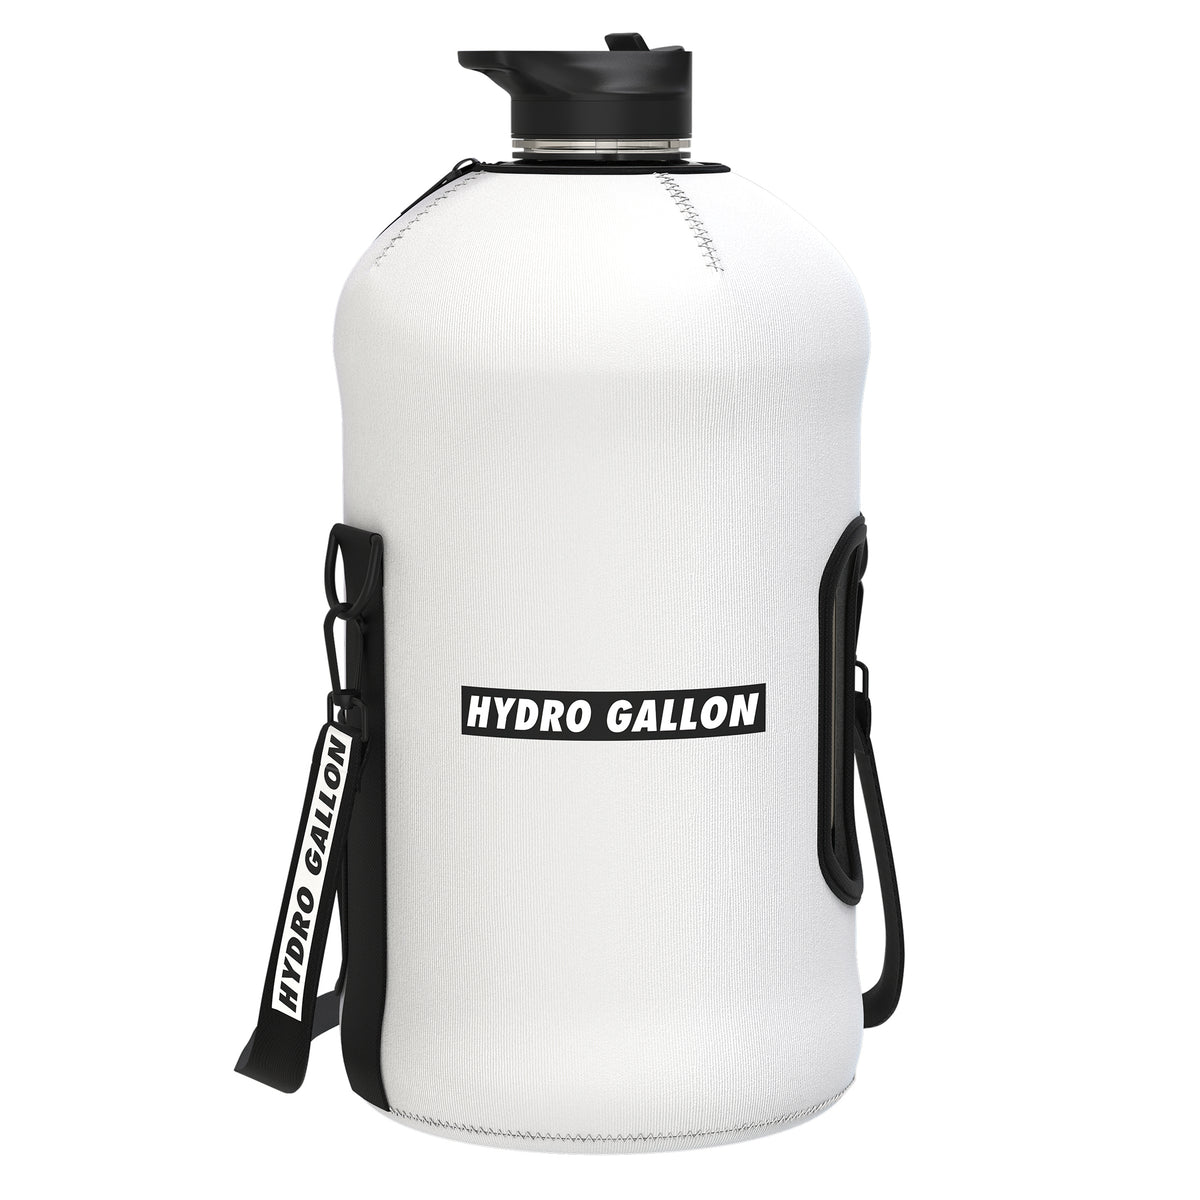 hydro gallon 1 one gallon water bottle jug with sports gym insulated sleeve hydrojug straw handle shoulder strap bpa free leakproof 128 oz time markers